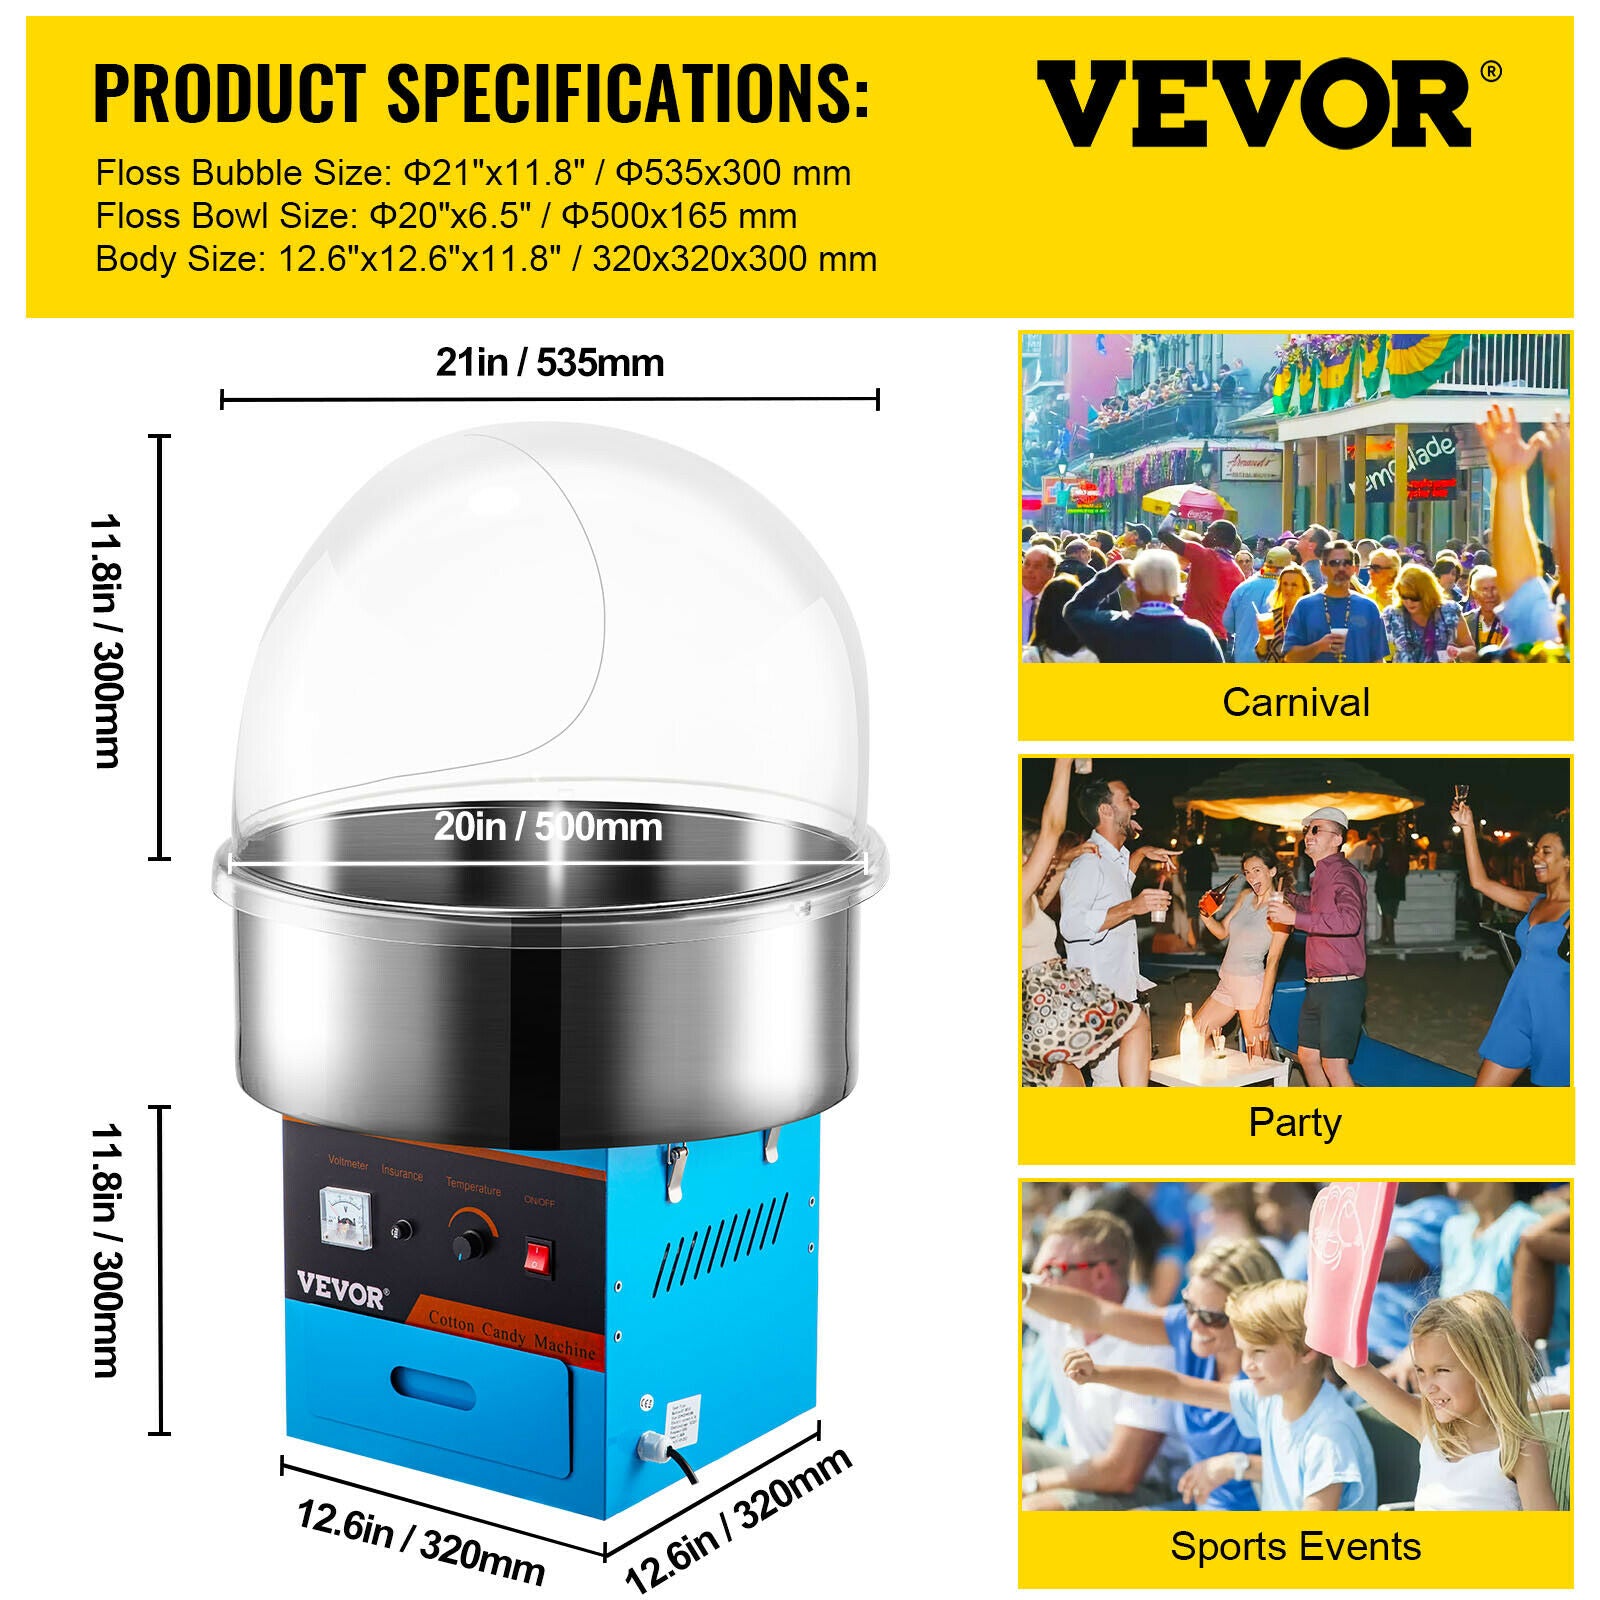 VEVOR Electric Candy Floss Machine - Commercial Candy Floss Maker - Temperature Controls for Party Festival Carnival Home